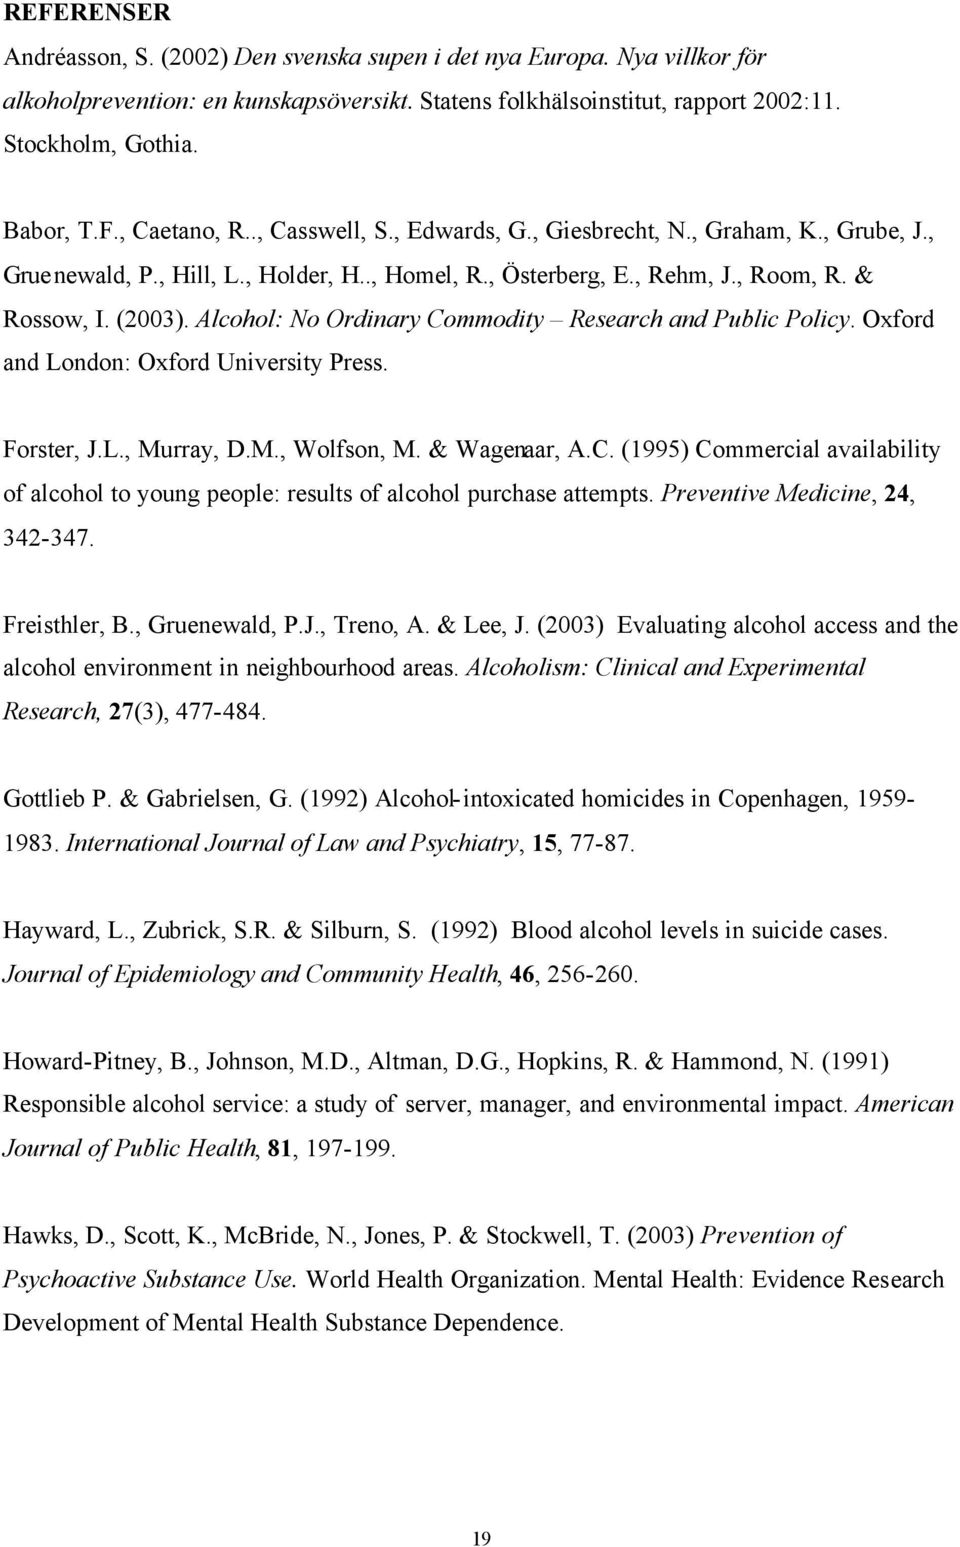 Alcohol: No Ordinary Commodity Research and Public Policy. Oxford and London: Oxford University Press. Forster, J.L., Murray, D.M., Wolfson, M. & Wagenaar, A.C. (1995) Commercial availability of alcohol to young people: results of alcohol purchase attempts.